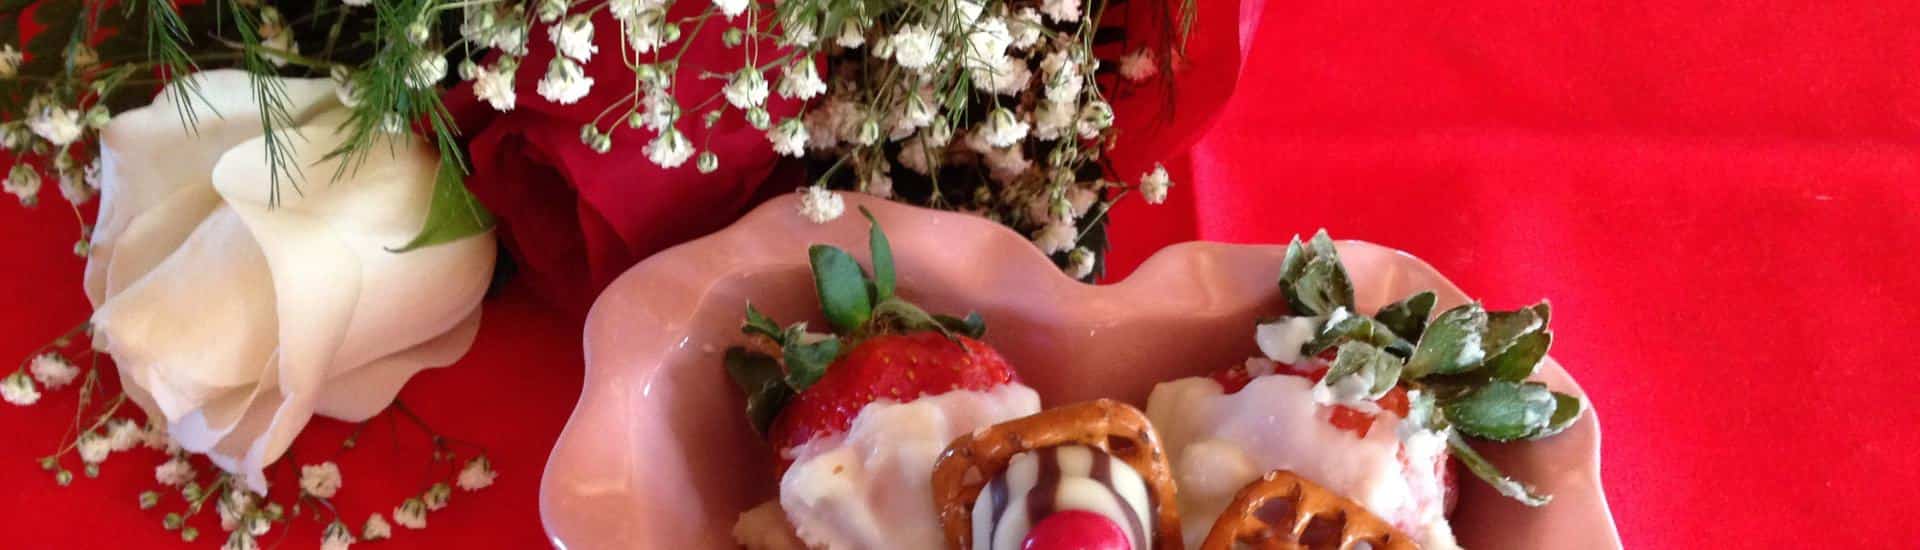 Close up view of pink heart shaped dish with white chocolate covered strawberries and a red and white rose on a red tablecloth